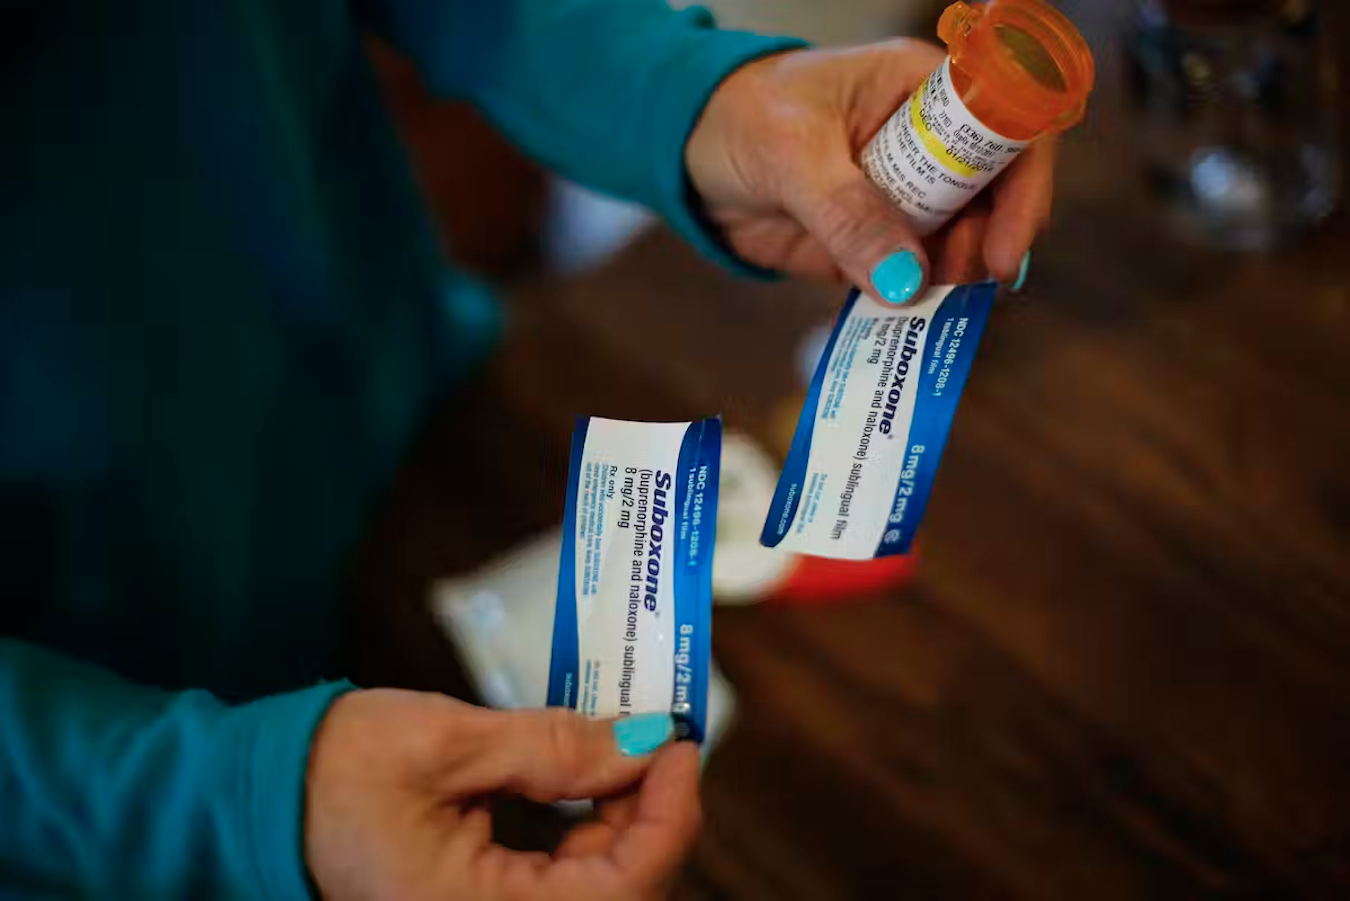 Suboxone is a medicine containing buprenorphine and naltrexone. One myth about opioid use disorder is the belief that using medication is the same as using opioids to get high. | Photo by Eamon Queeney/The Washington Post via Getty Images